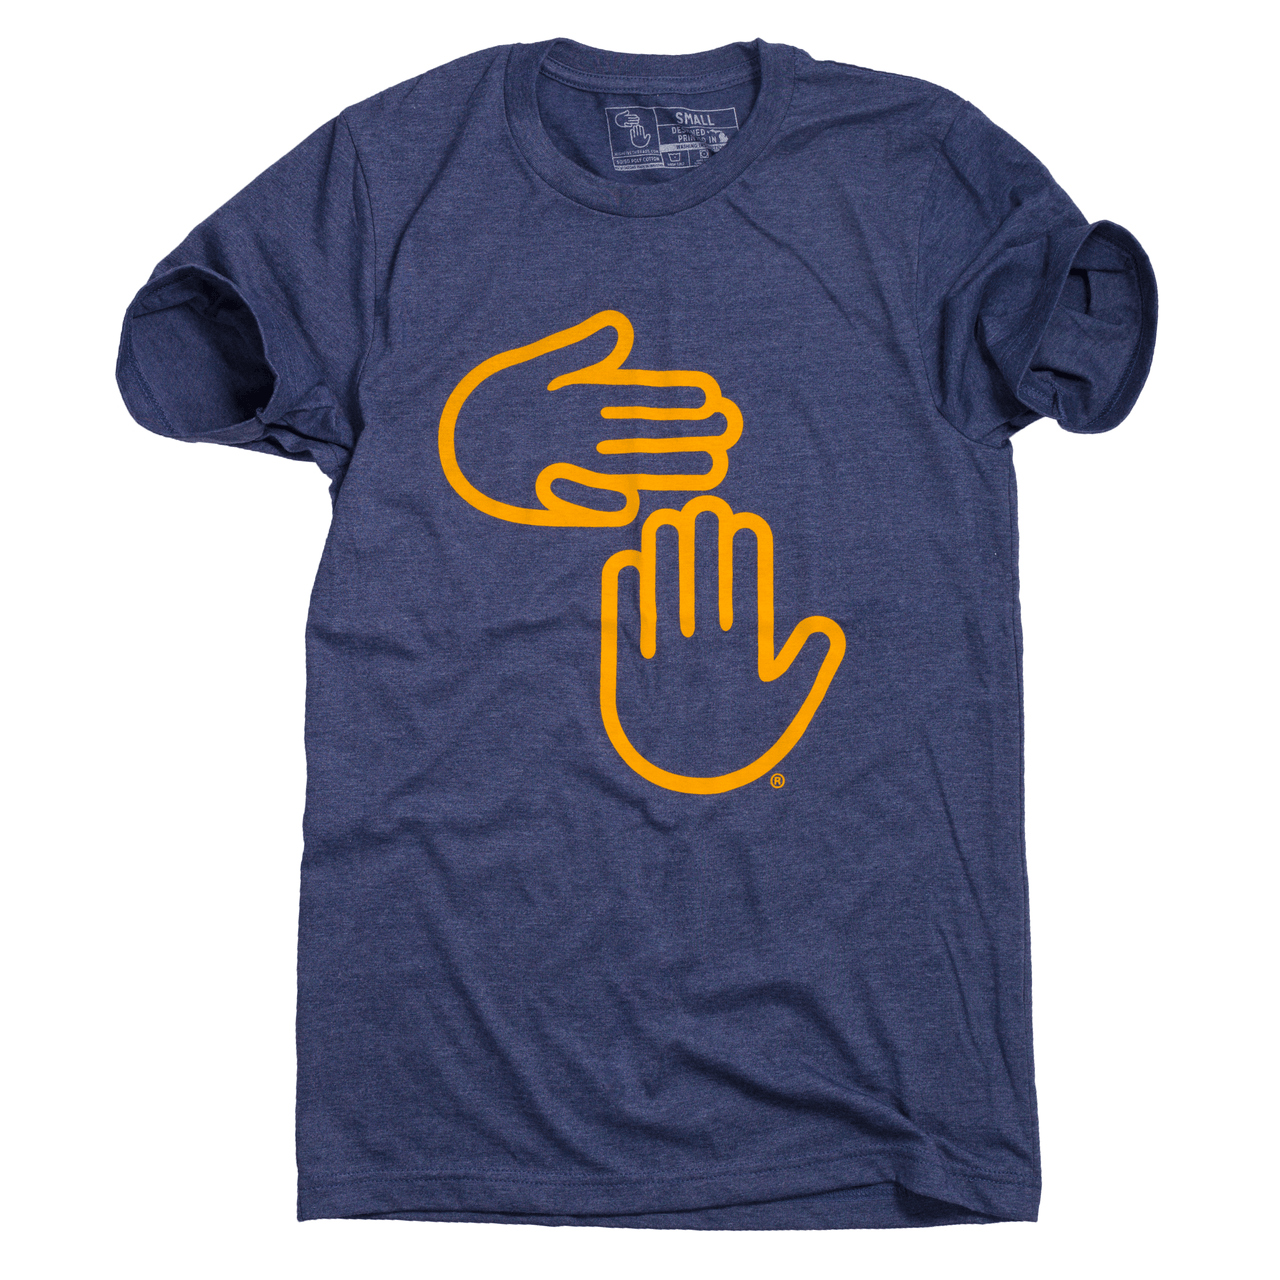 Michigan Hands Tee (Navy and Gold)